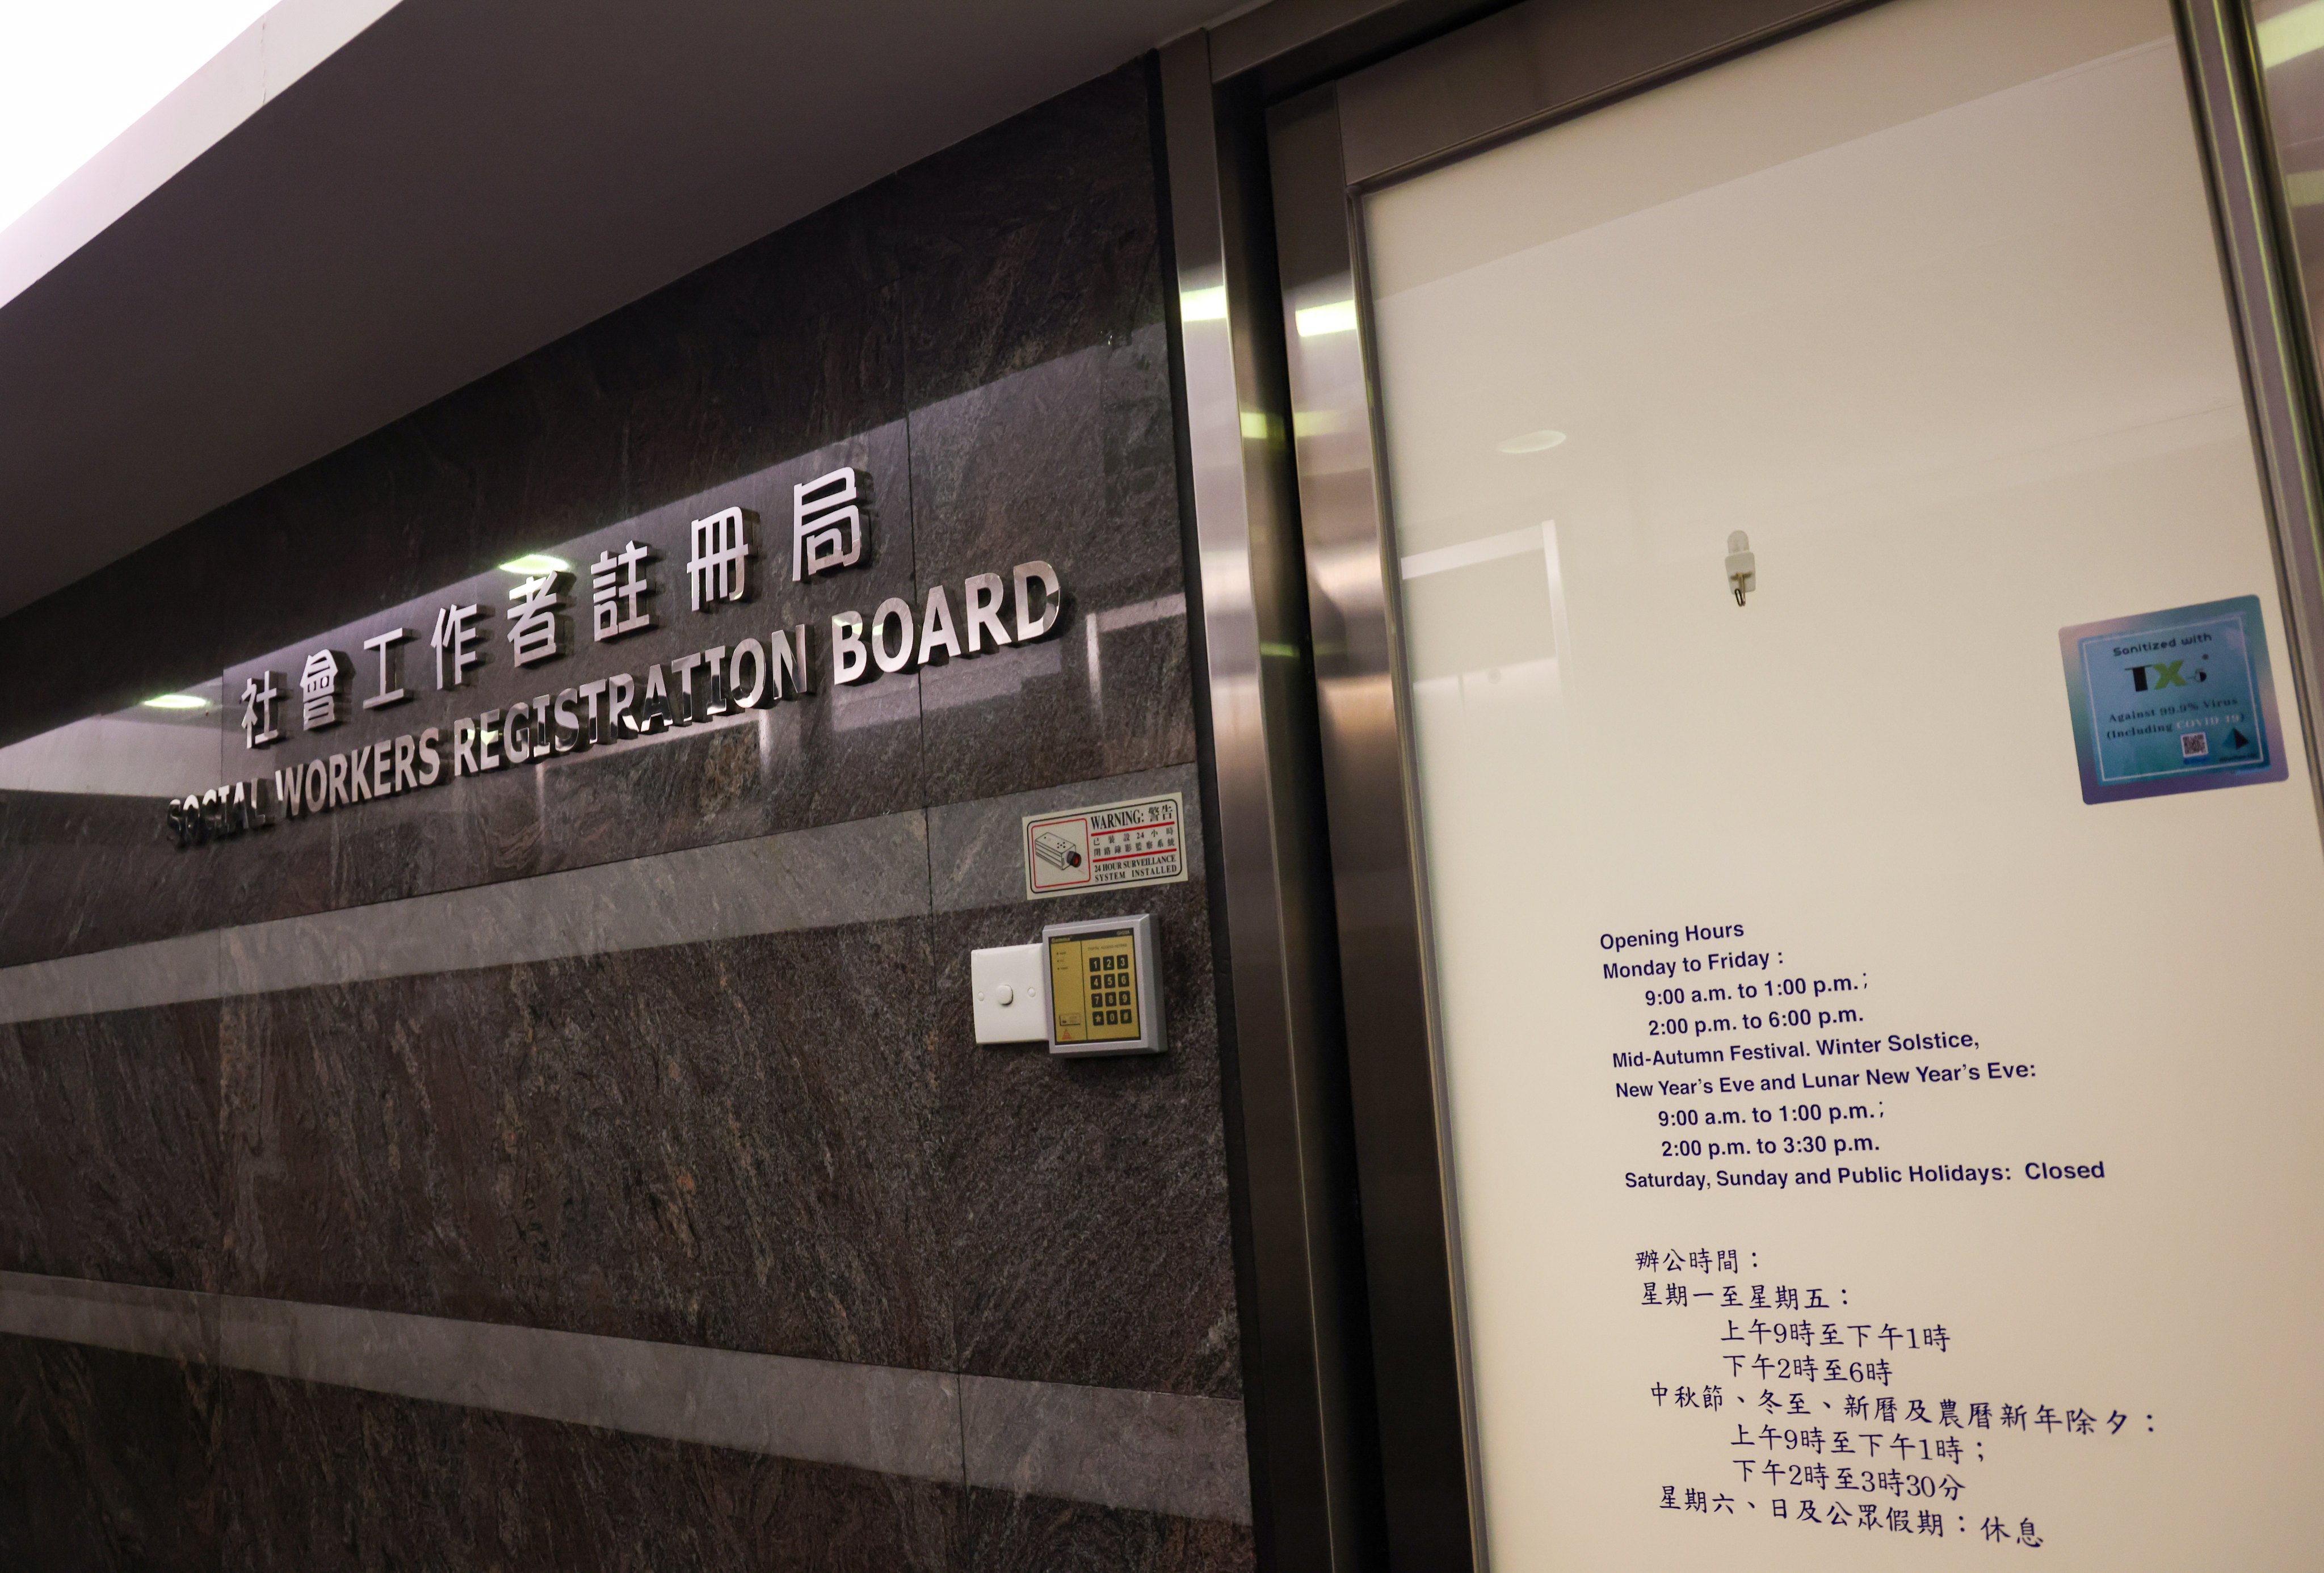 The Social Workers Registration Board has argued that it carefully considers each case to determine if a person with a criminal record has made enough life changes to join the profession. Photo: Jelly Tse